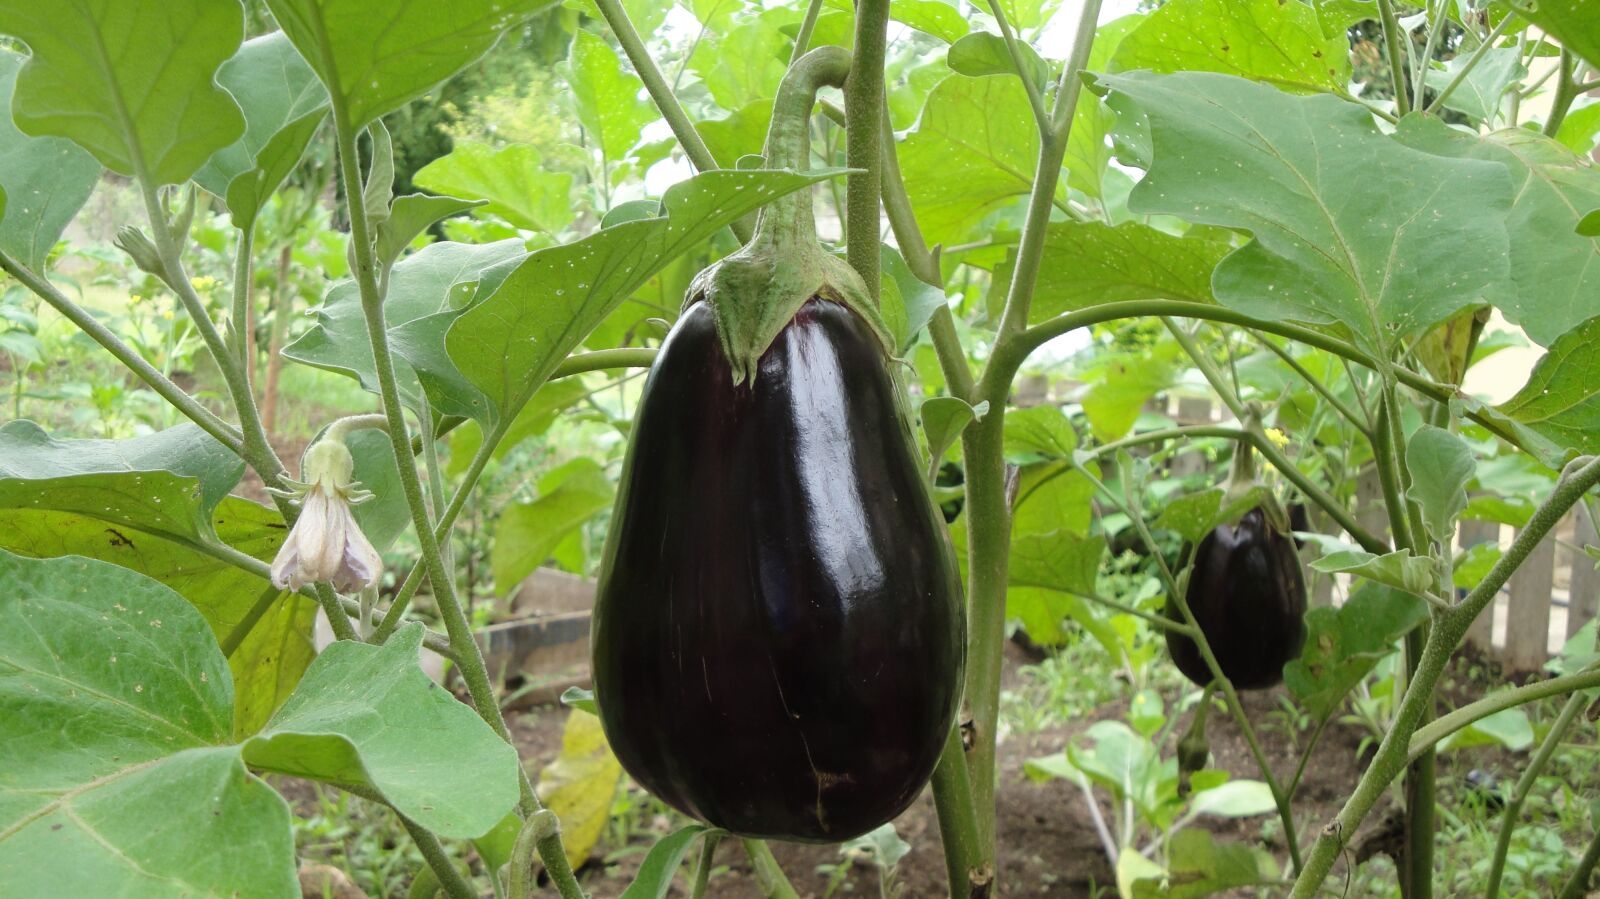 Sony Cyber-shot DSC-W290 sample photo. Eggplant, plant, agriculture photography